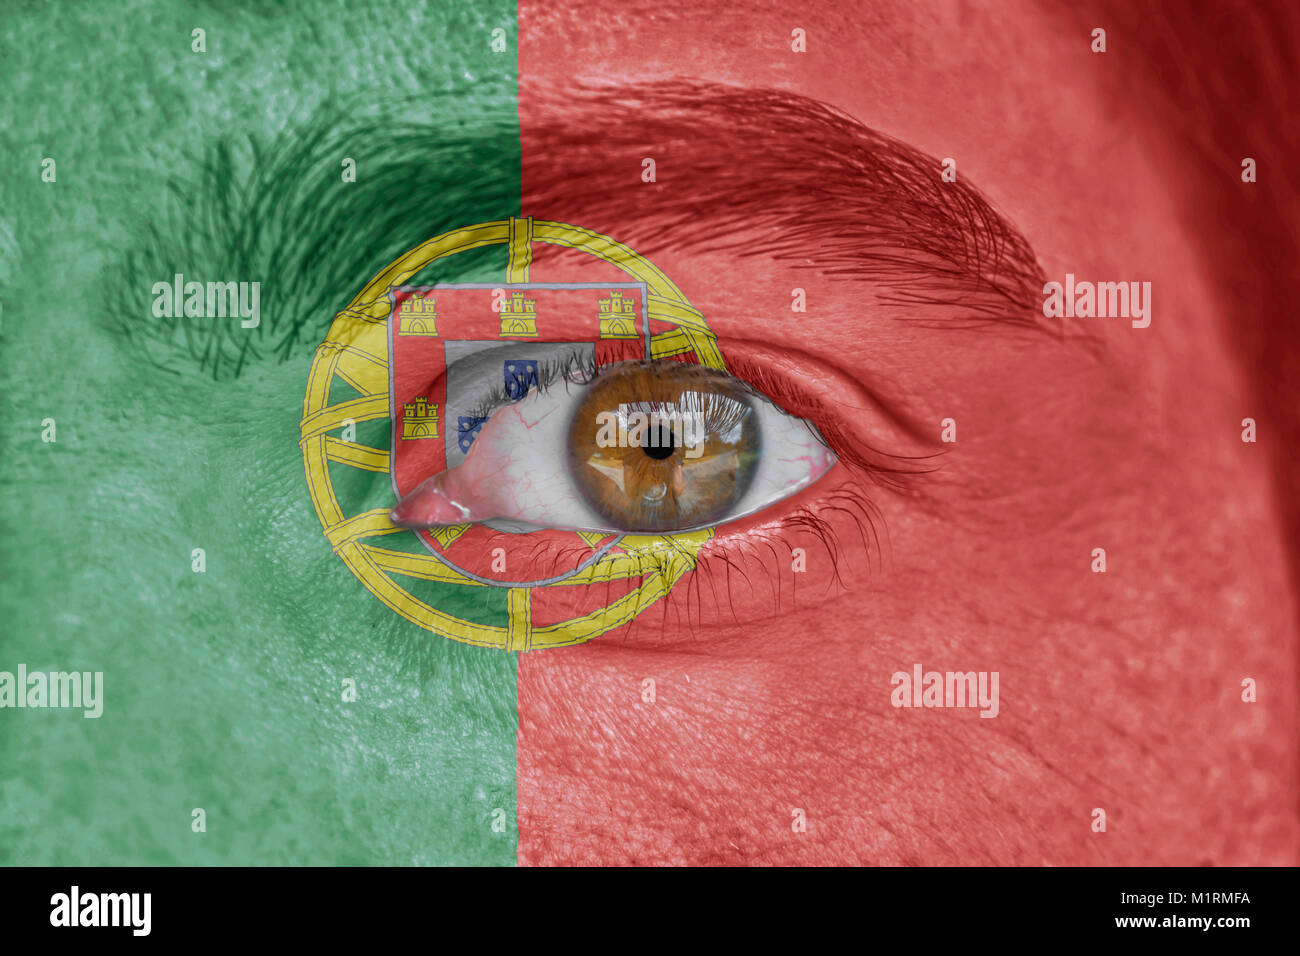 Human face and eye painted with flag of Portugal Stock Photo